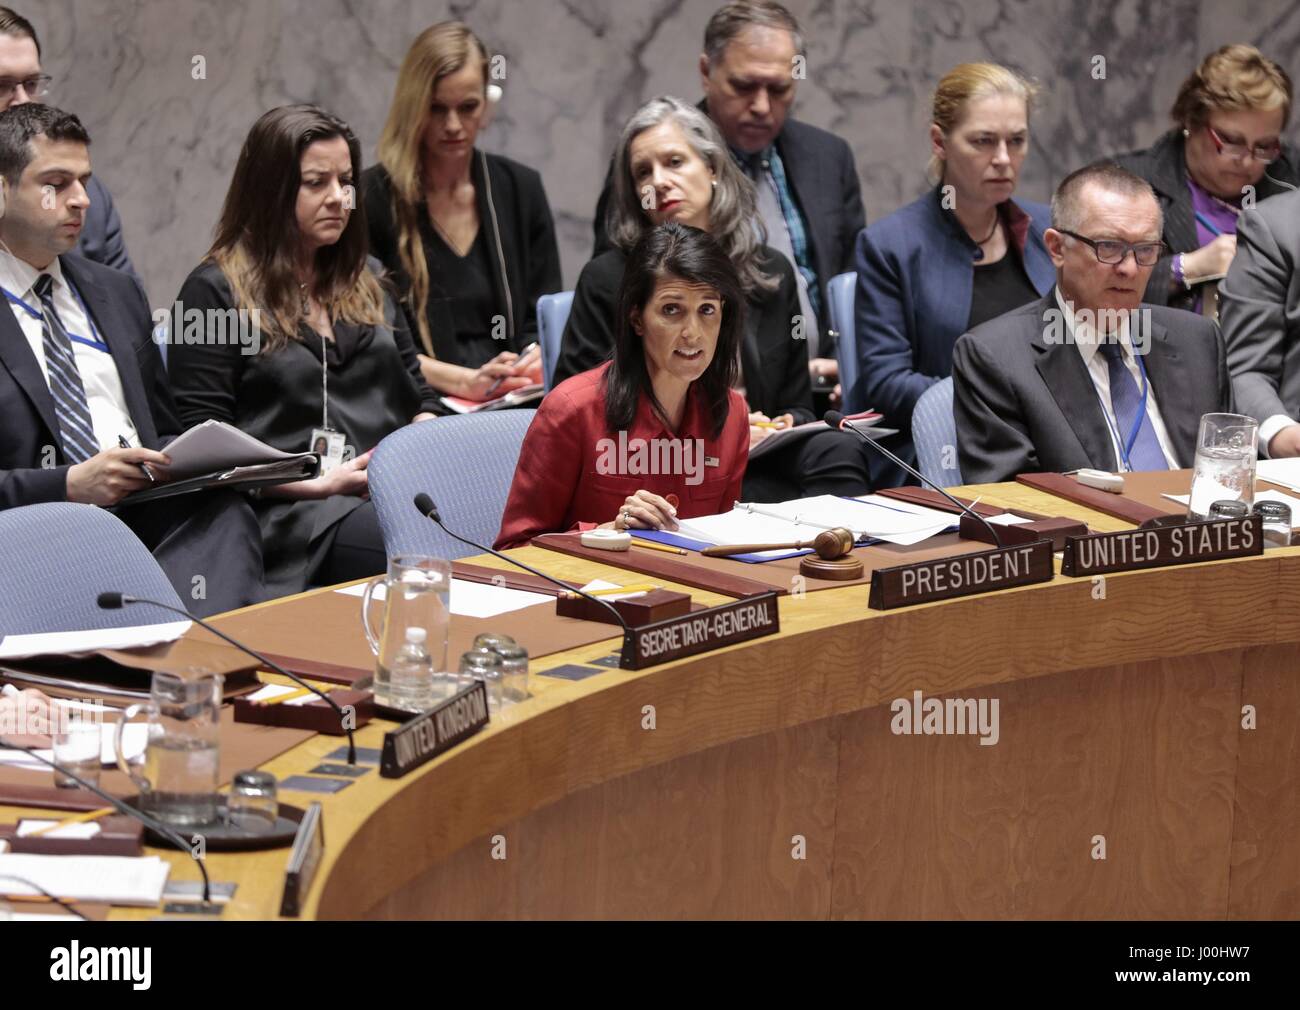 United Nations, New York, USA, 07 April 2017 - The Security Council held an emergency meeting on the situation in Syria, following reports of air strikes against the Shayrat Airbase in Syria conducted by the United States. Nikki Haley, United States Permanent Representative to the UN and President of the Security Council for April, addresses the meeting today at the UN Headquarters in New York. Photo: Luiz Rampelotto/EuropaNewswire | usage worldwide Credit: dpa picture alliance/Alamy Live News Stock Photo